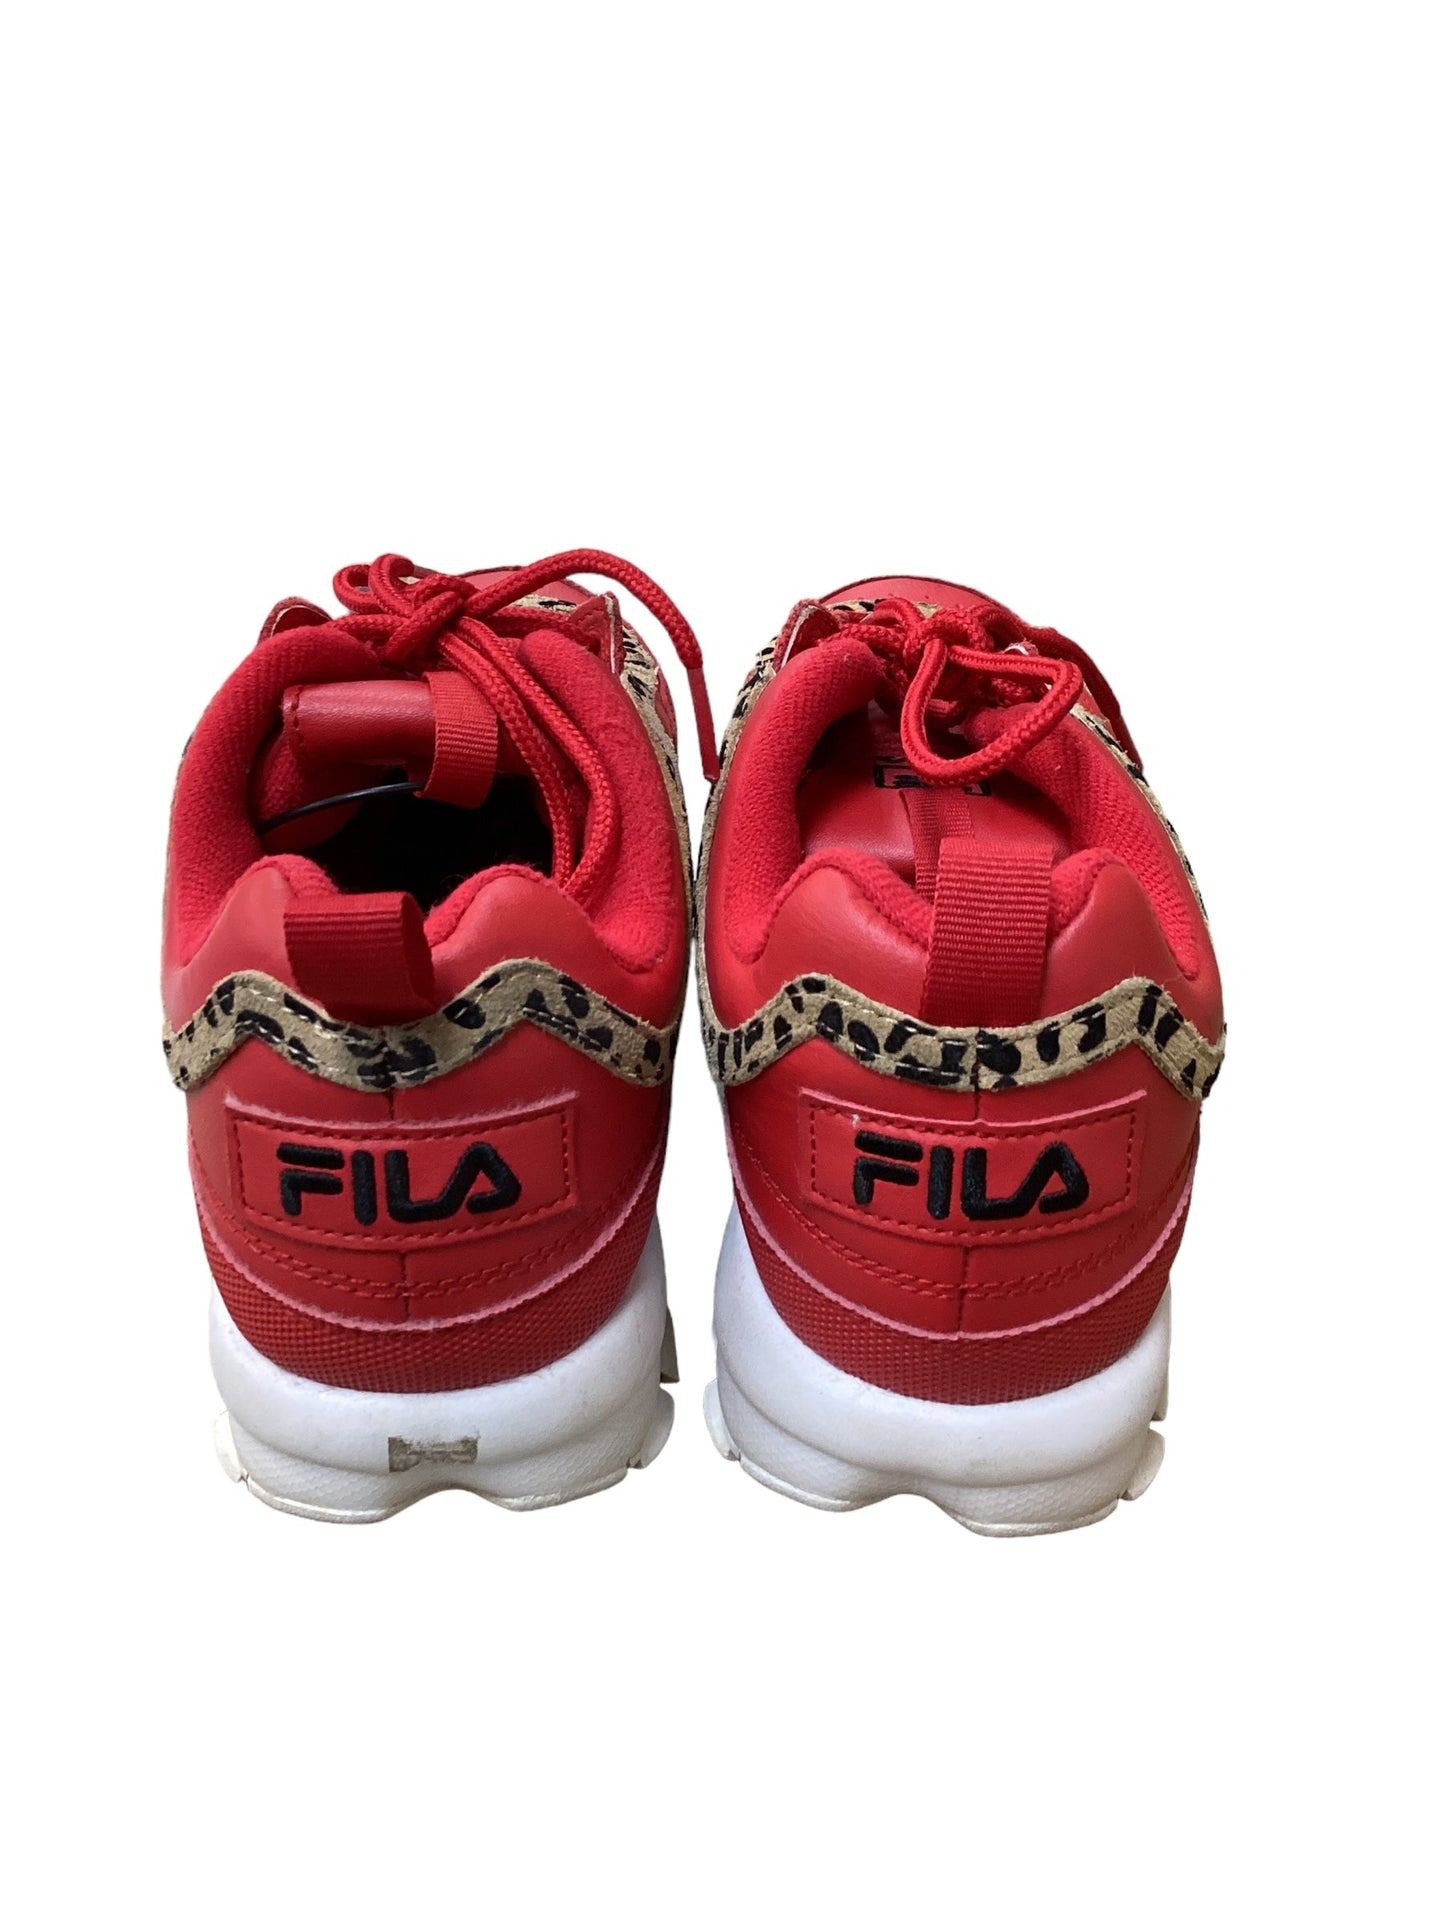 Shoes Sneakers By Fila  Size: 7.5